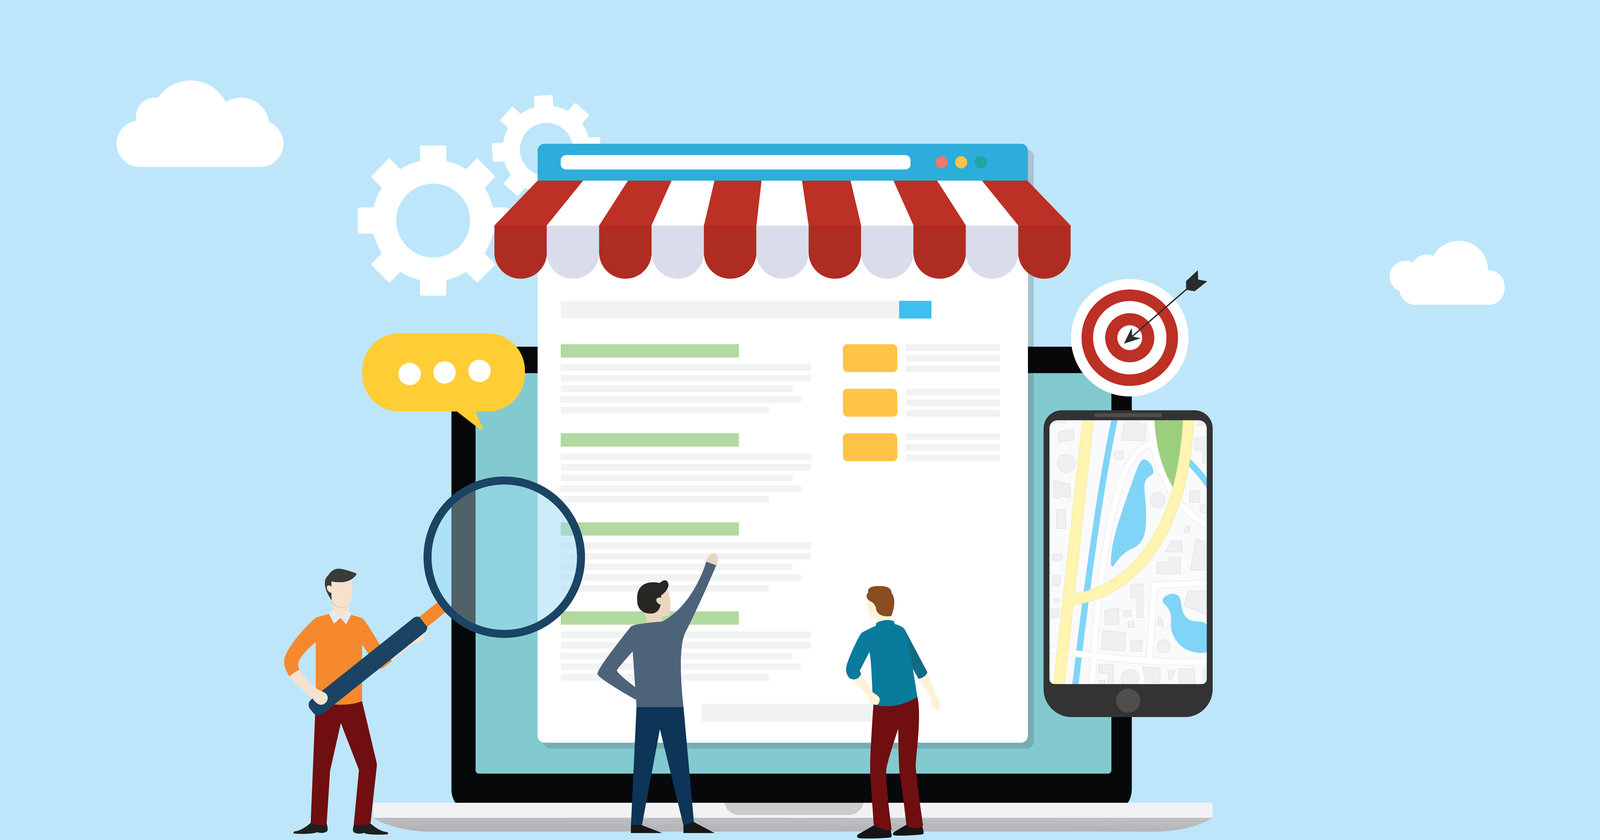 Local Search Optimization for Your Site